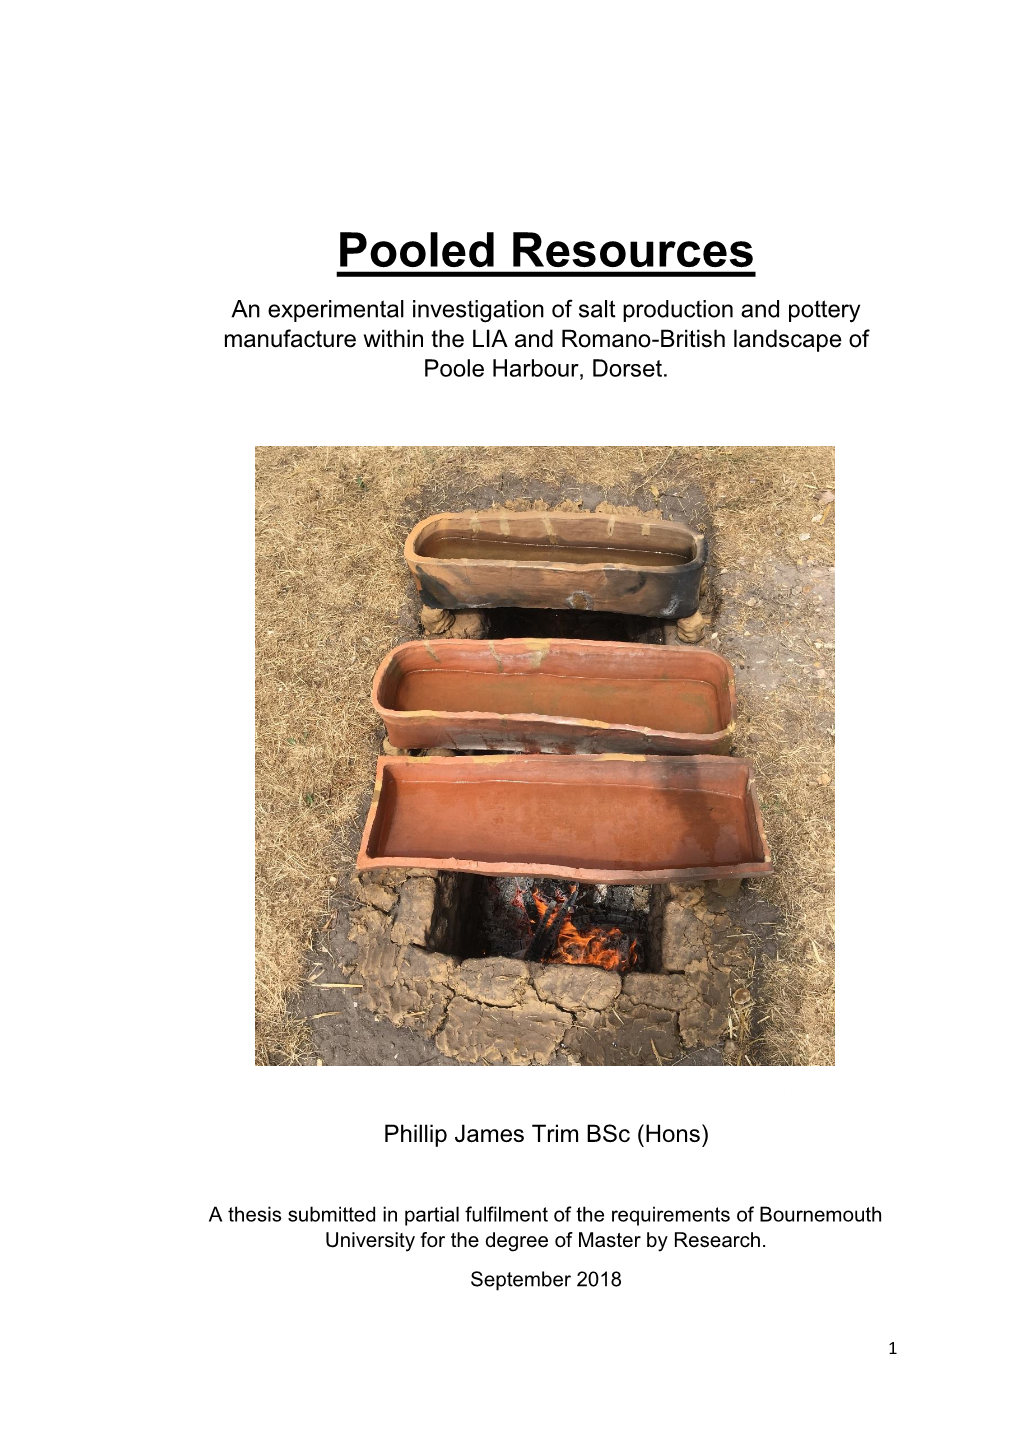 Pooled Resources an Experimental Investigation of Salt Production and Pottery Manufacture Within the LIA and Romano-British Landscape of Poole Harbour, Dorset